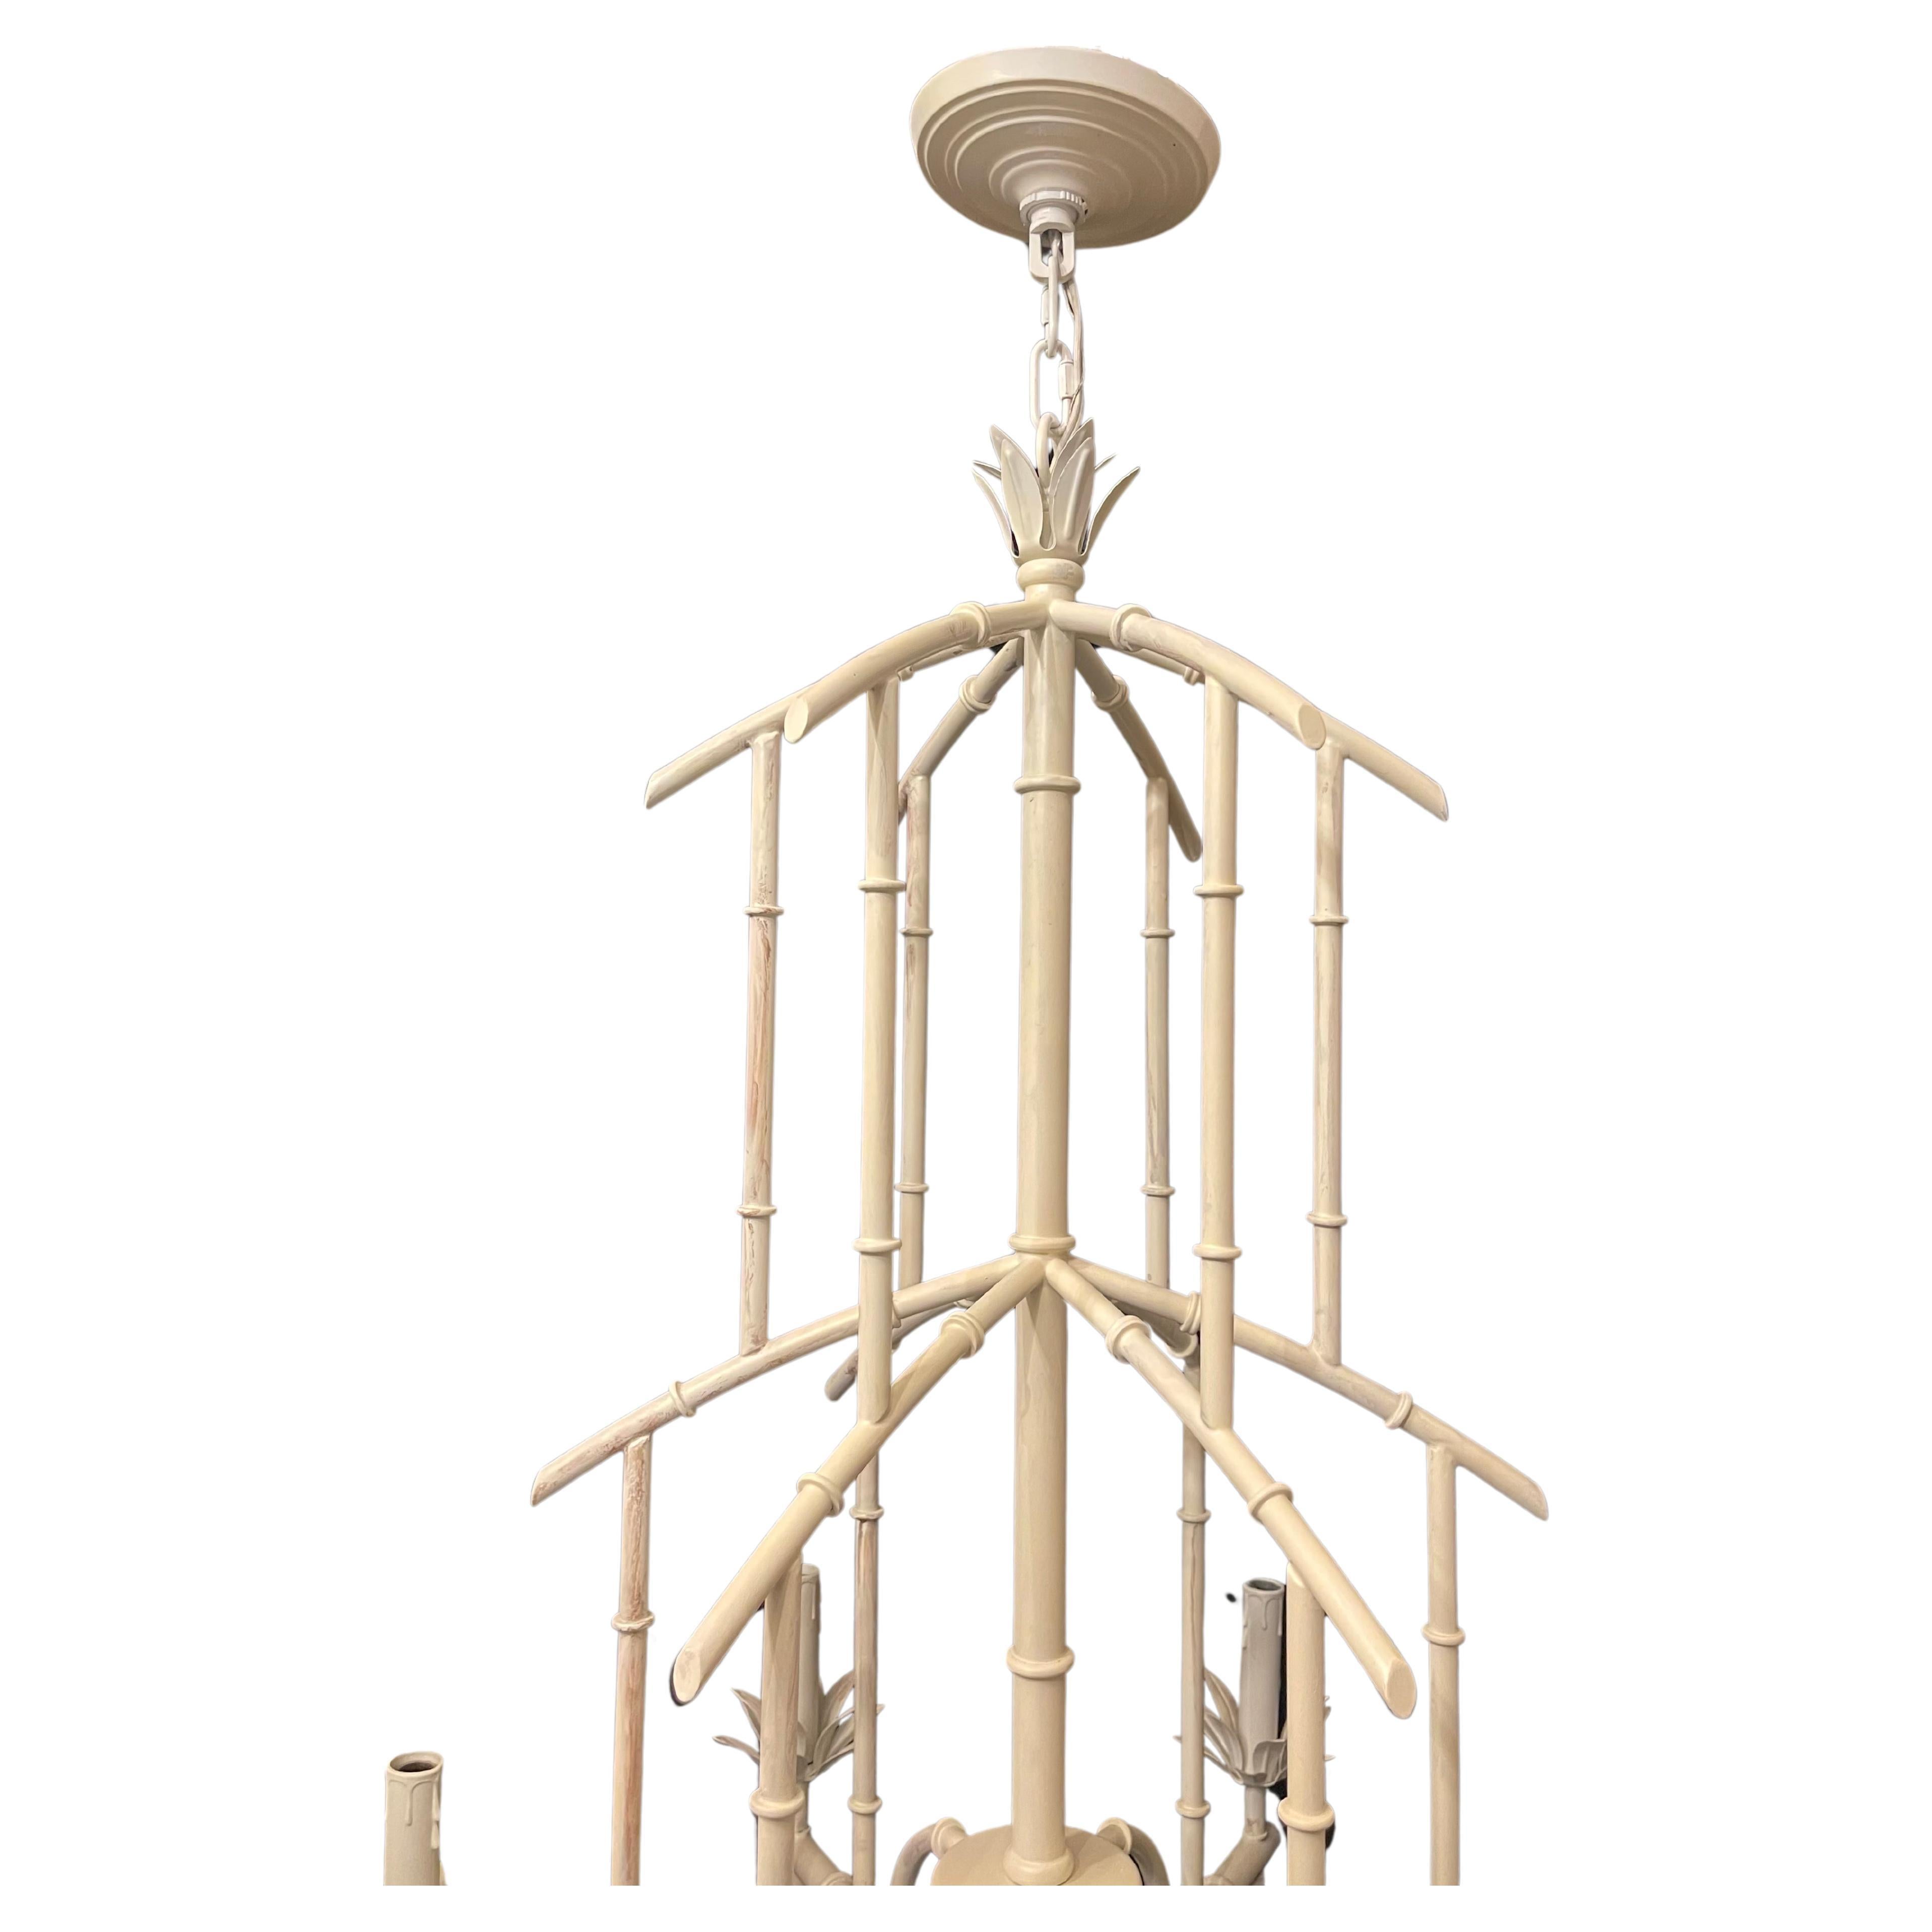 A Wonderful White Painted Tole Pagoda Bamboo Chinoiserie Form Large Chandelier Rewired With 6 Candelabra Light Fixture